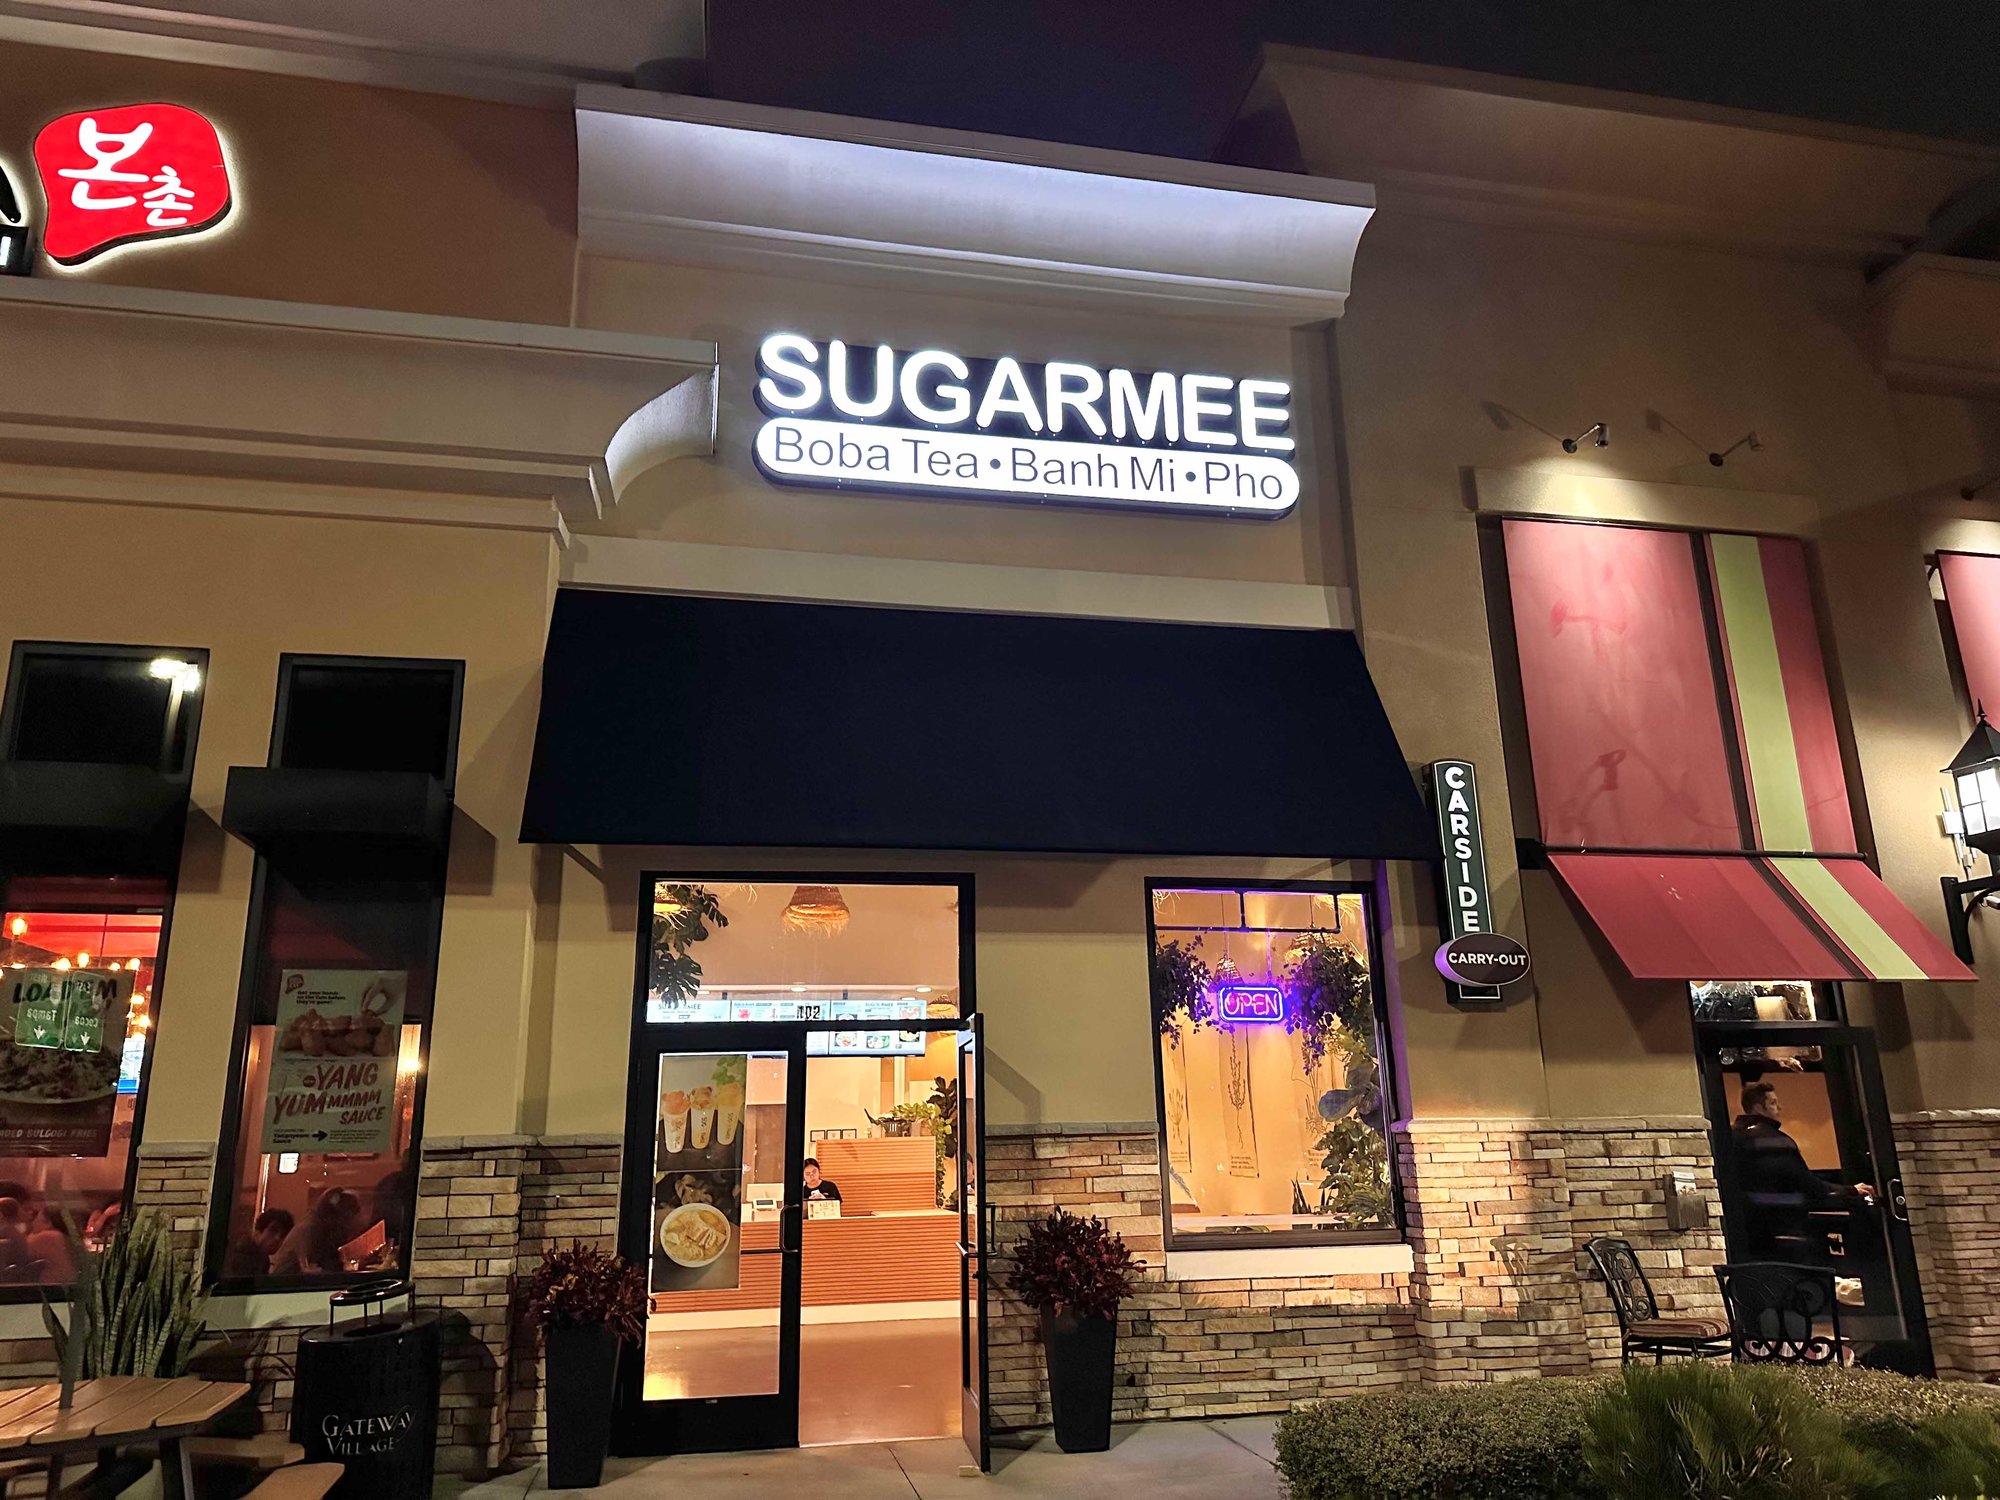 front of sugarmee building at night